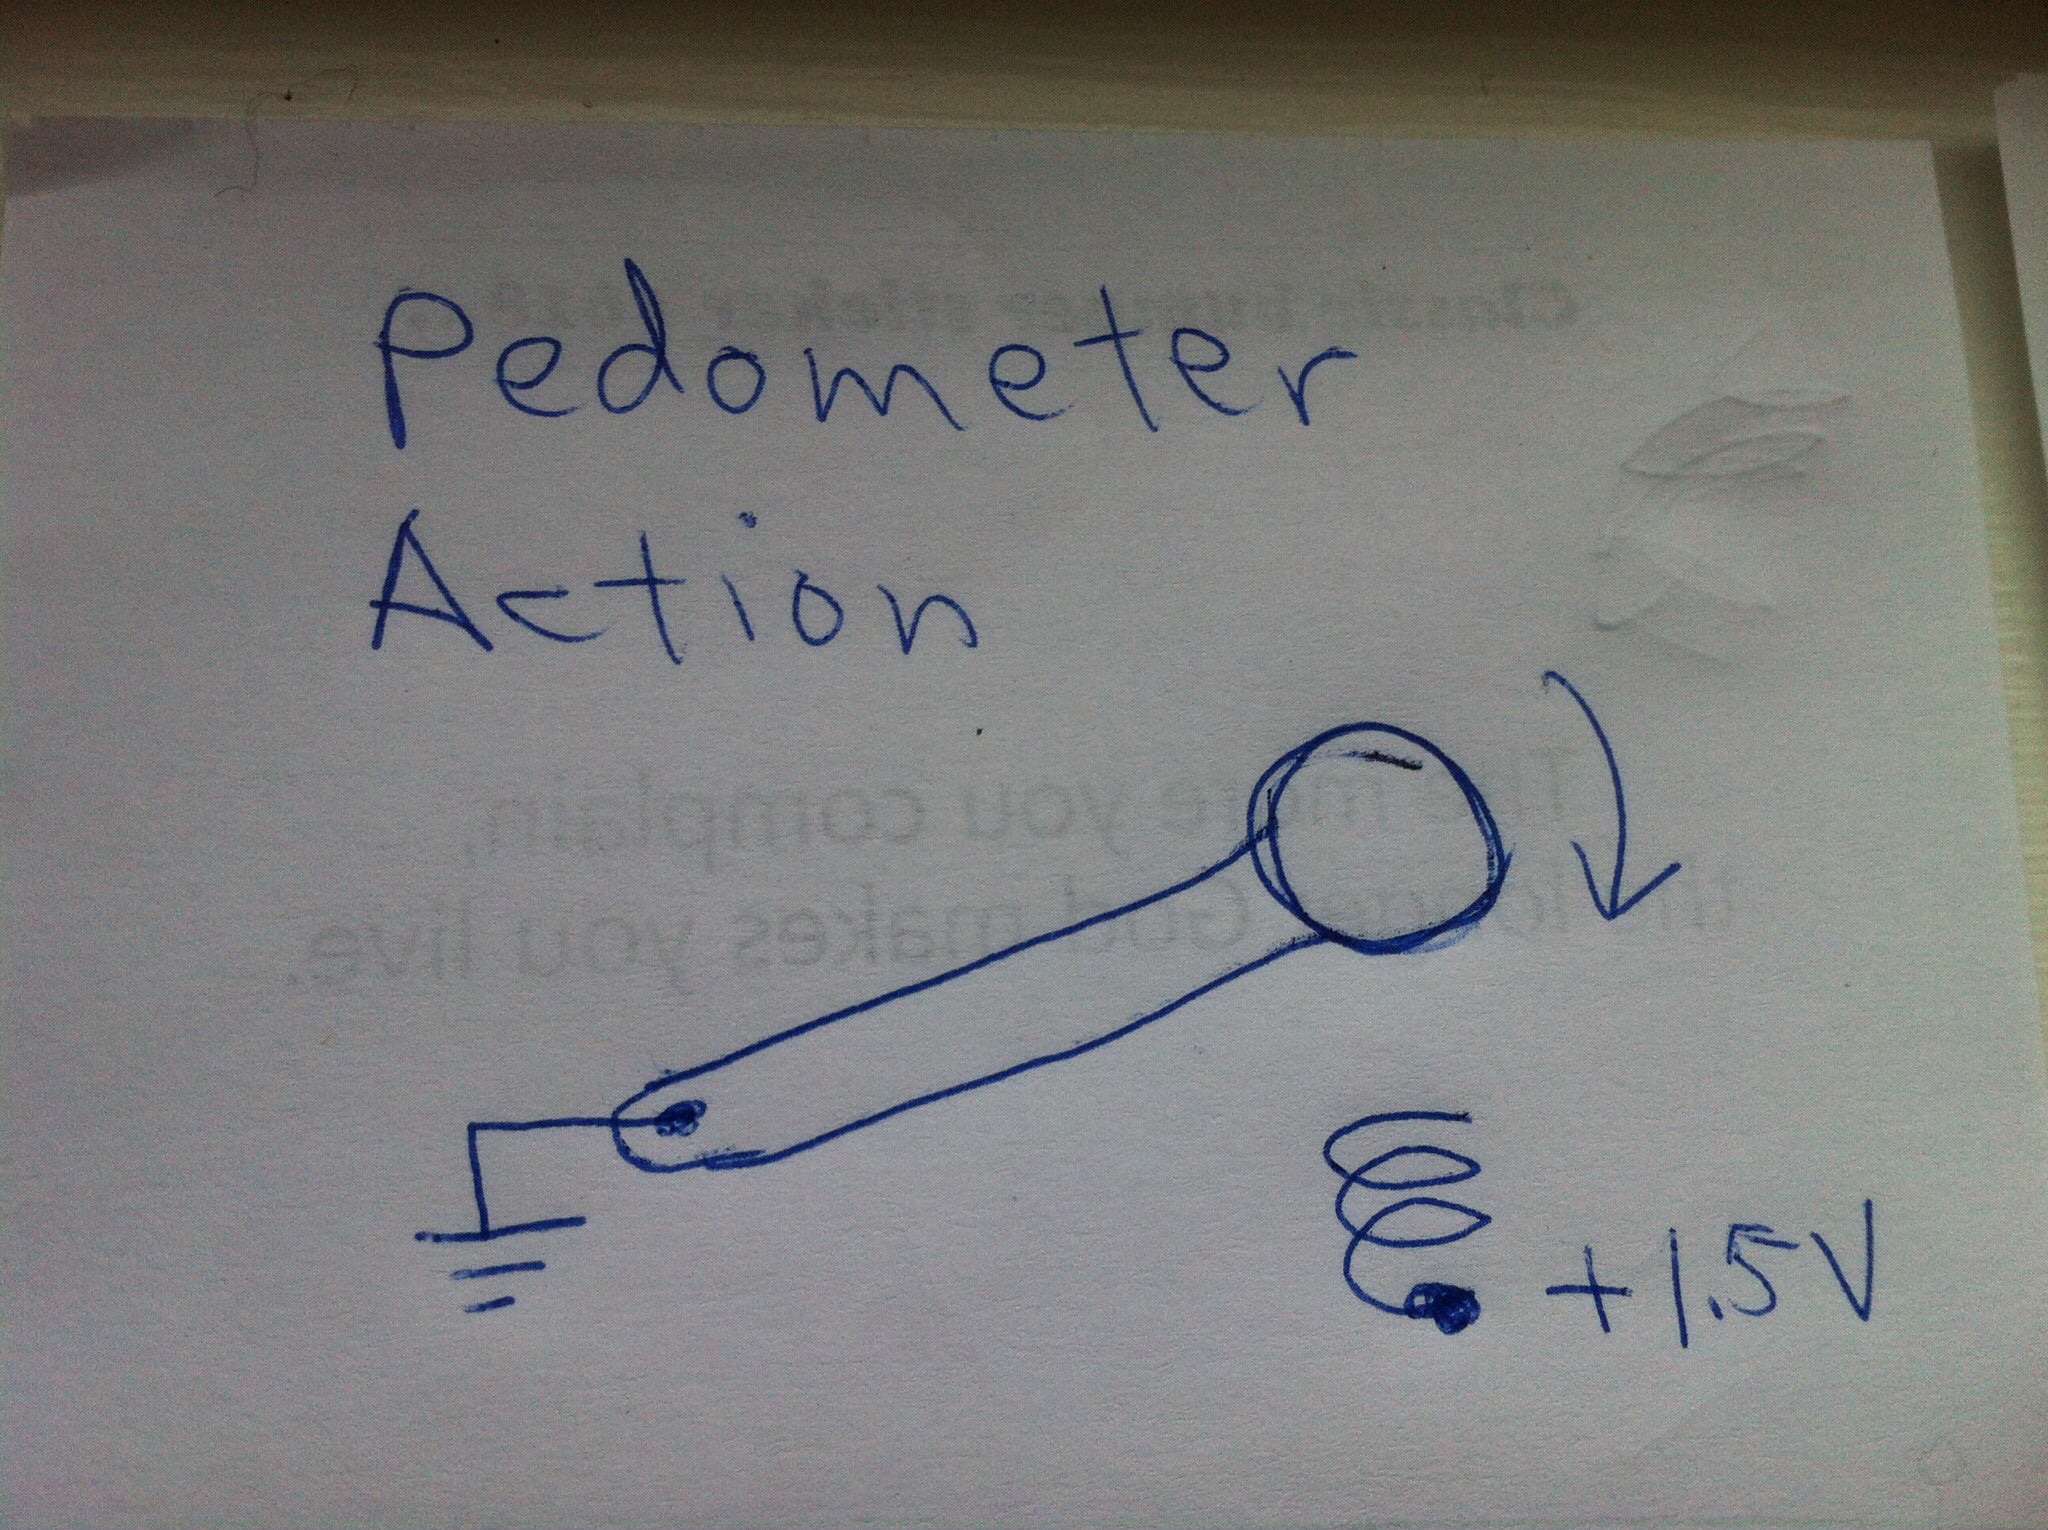 Turn a Pedometer Into a Digital Counter